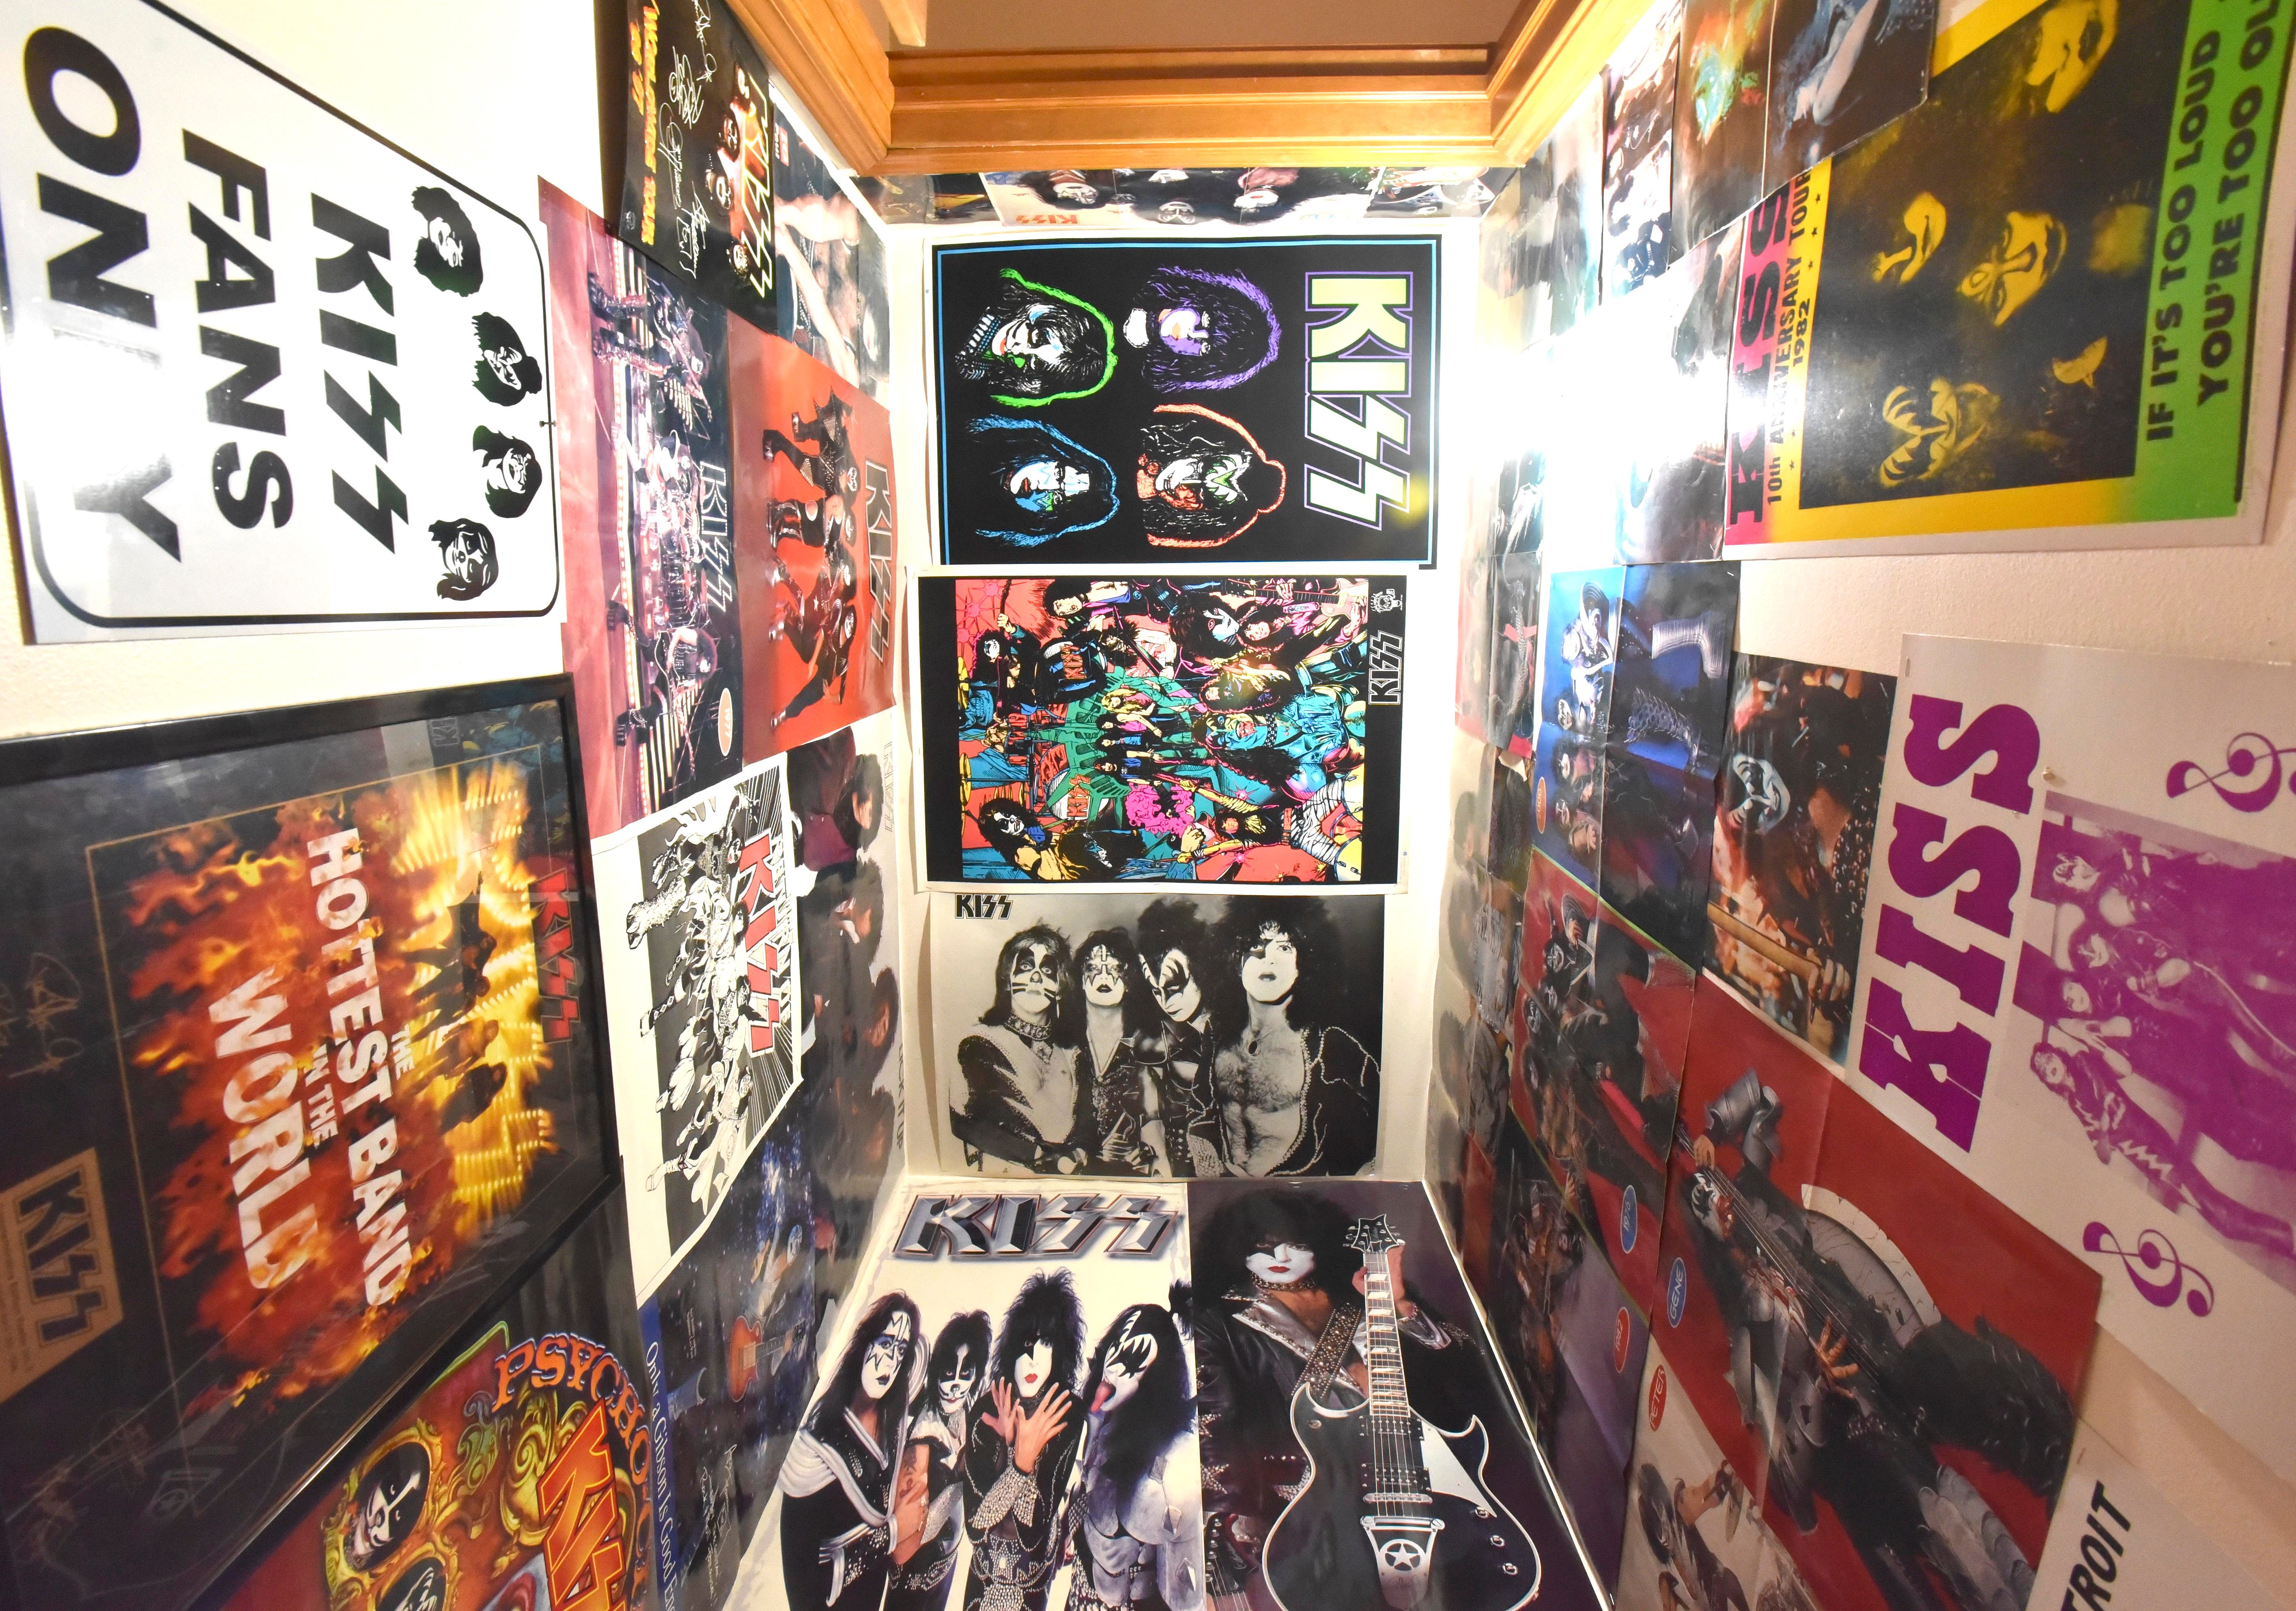 KISS posters are displayed on the staircase walls to the basement.